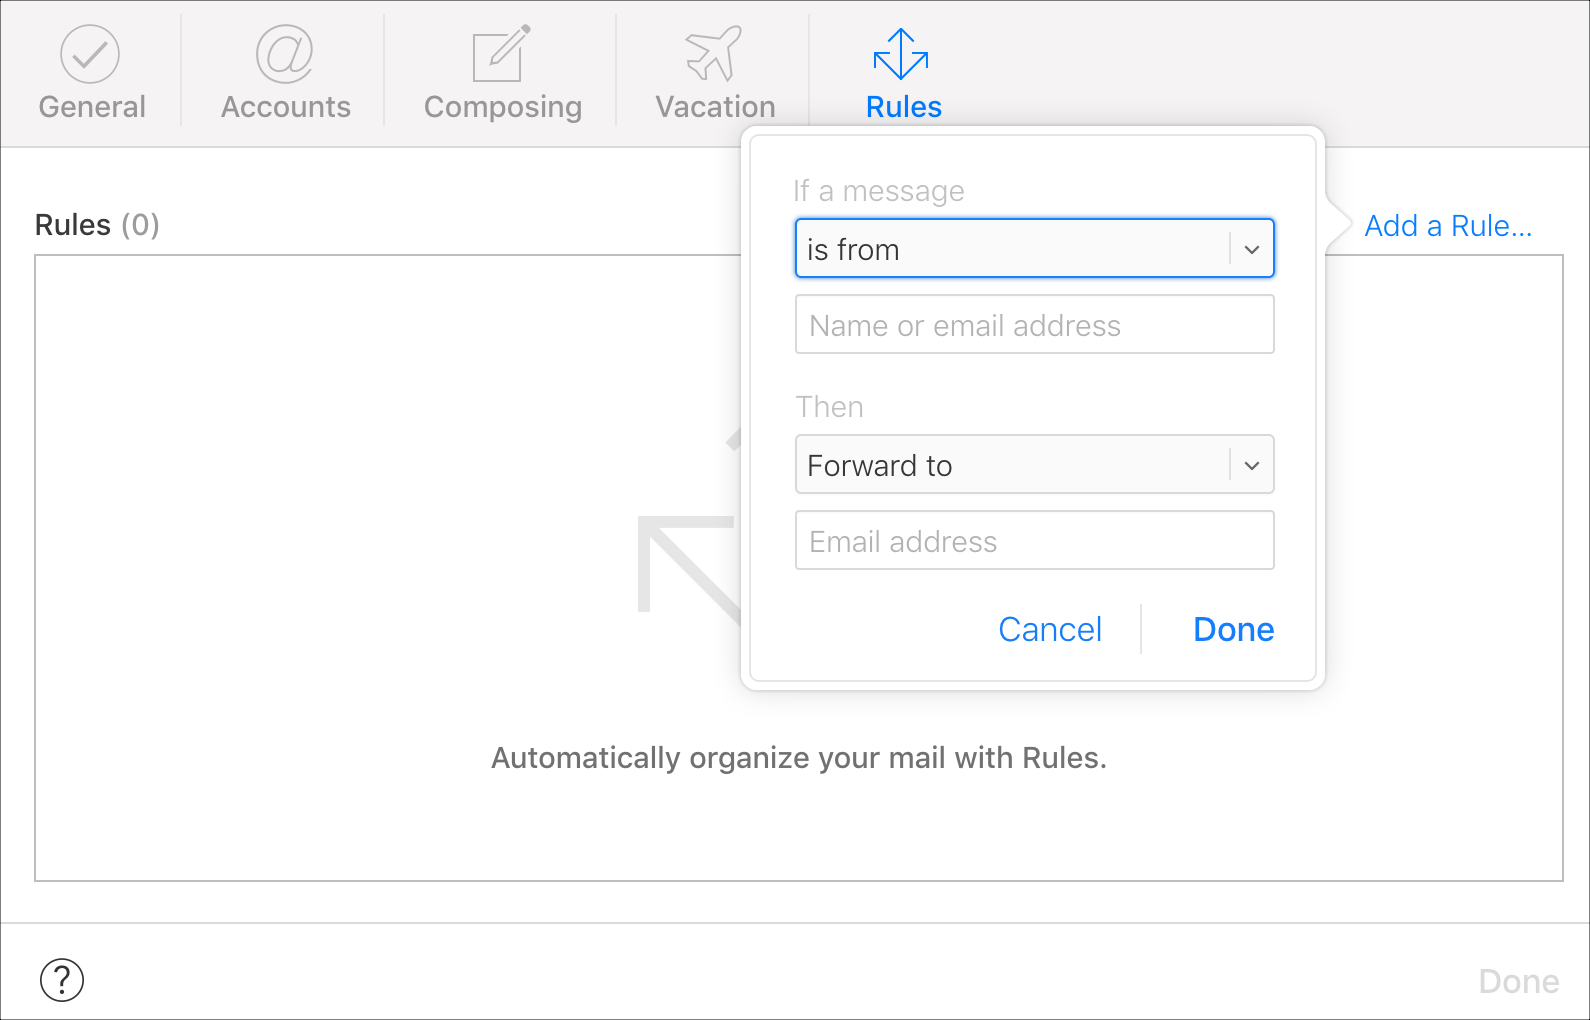 how to set up icloud email on outlook for mac